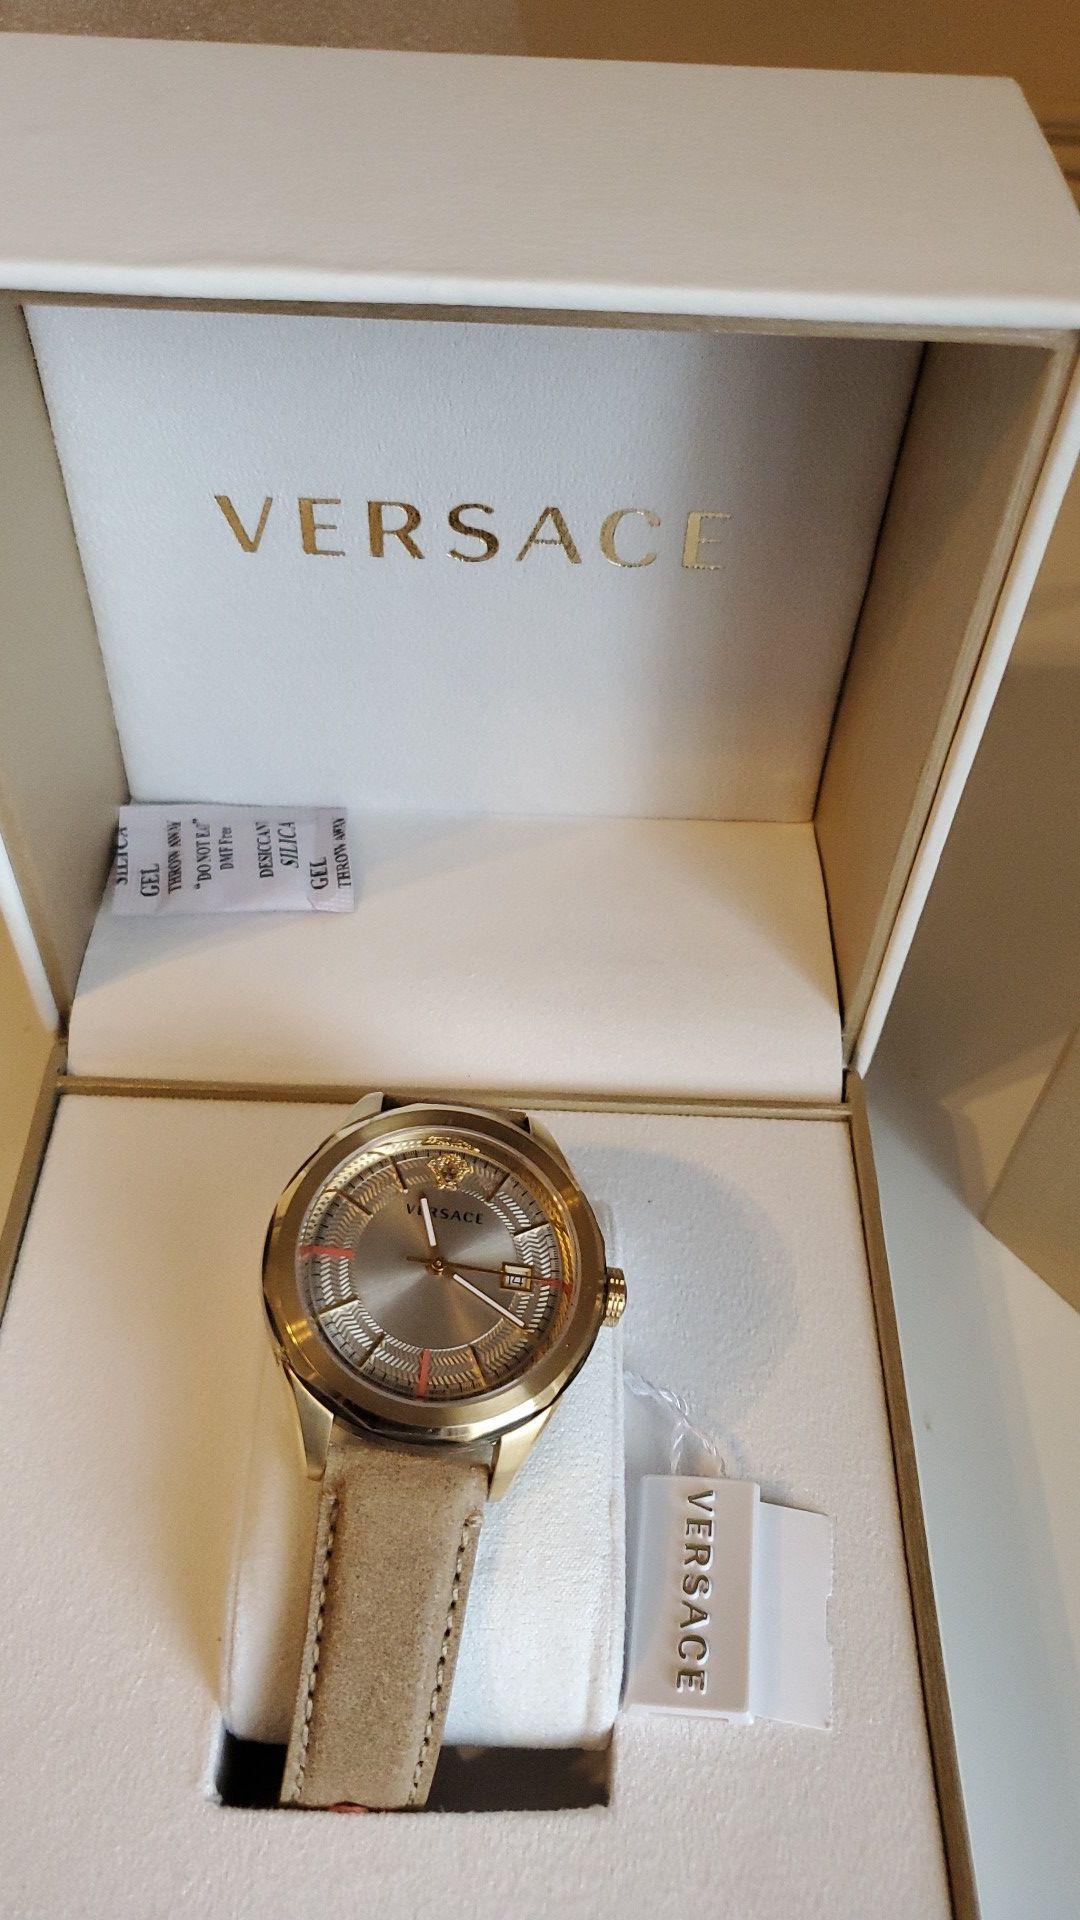 Versace wrist leather watch.(authentic swiss made)NO LOW BALLERS